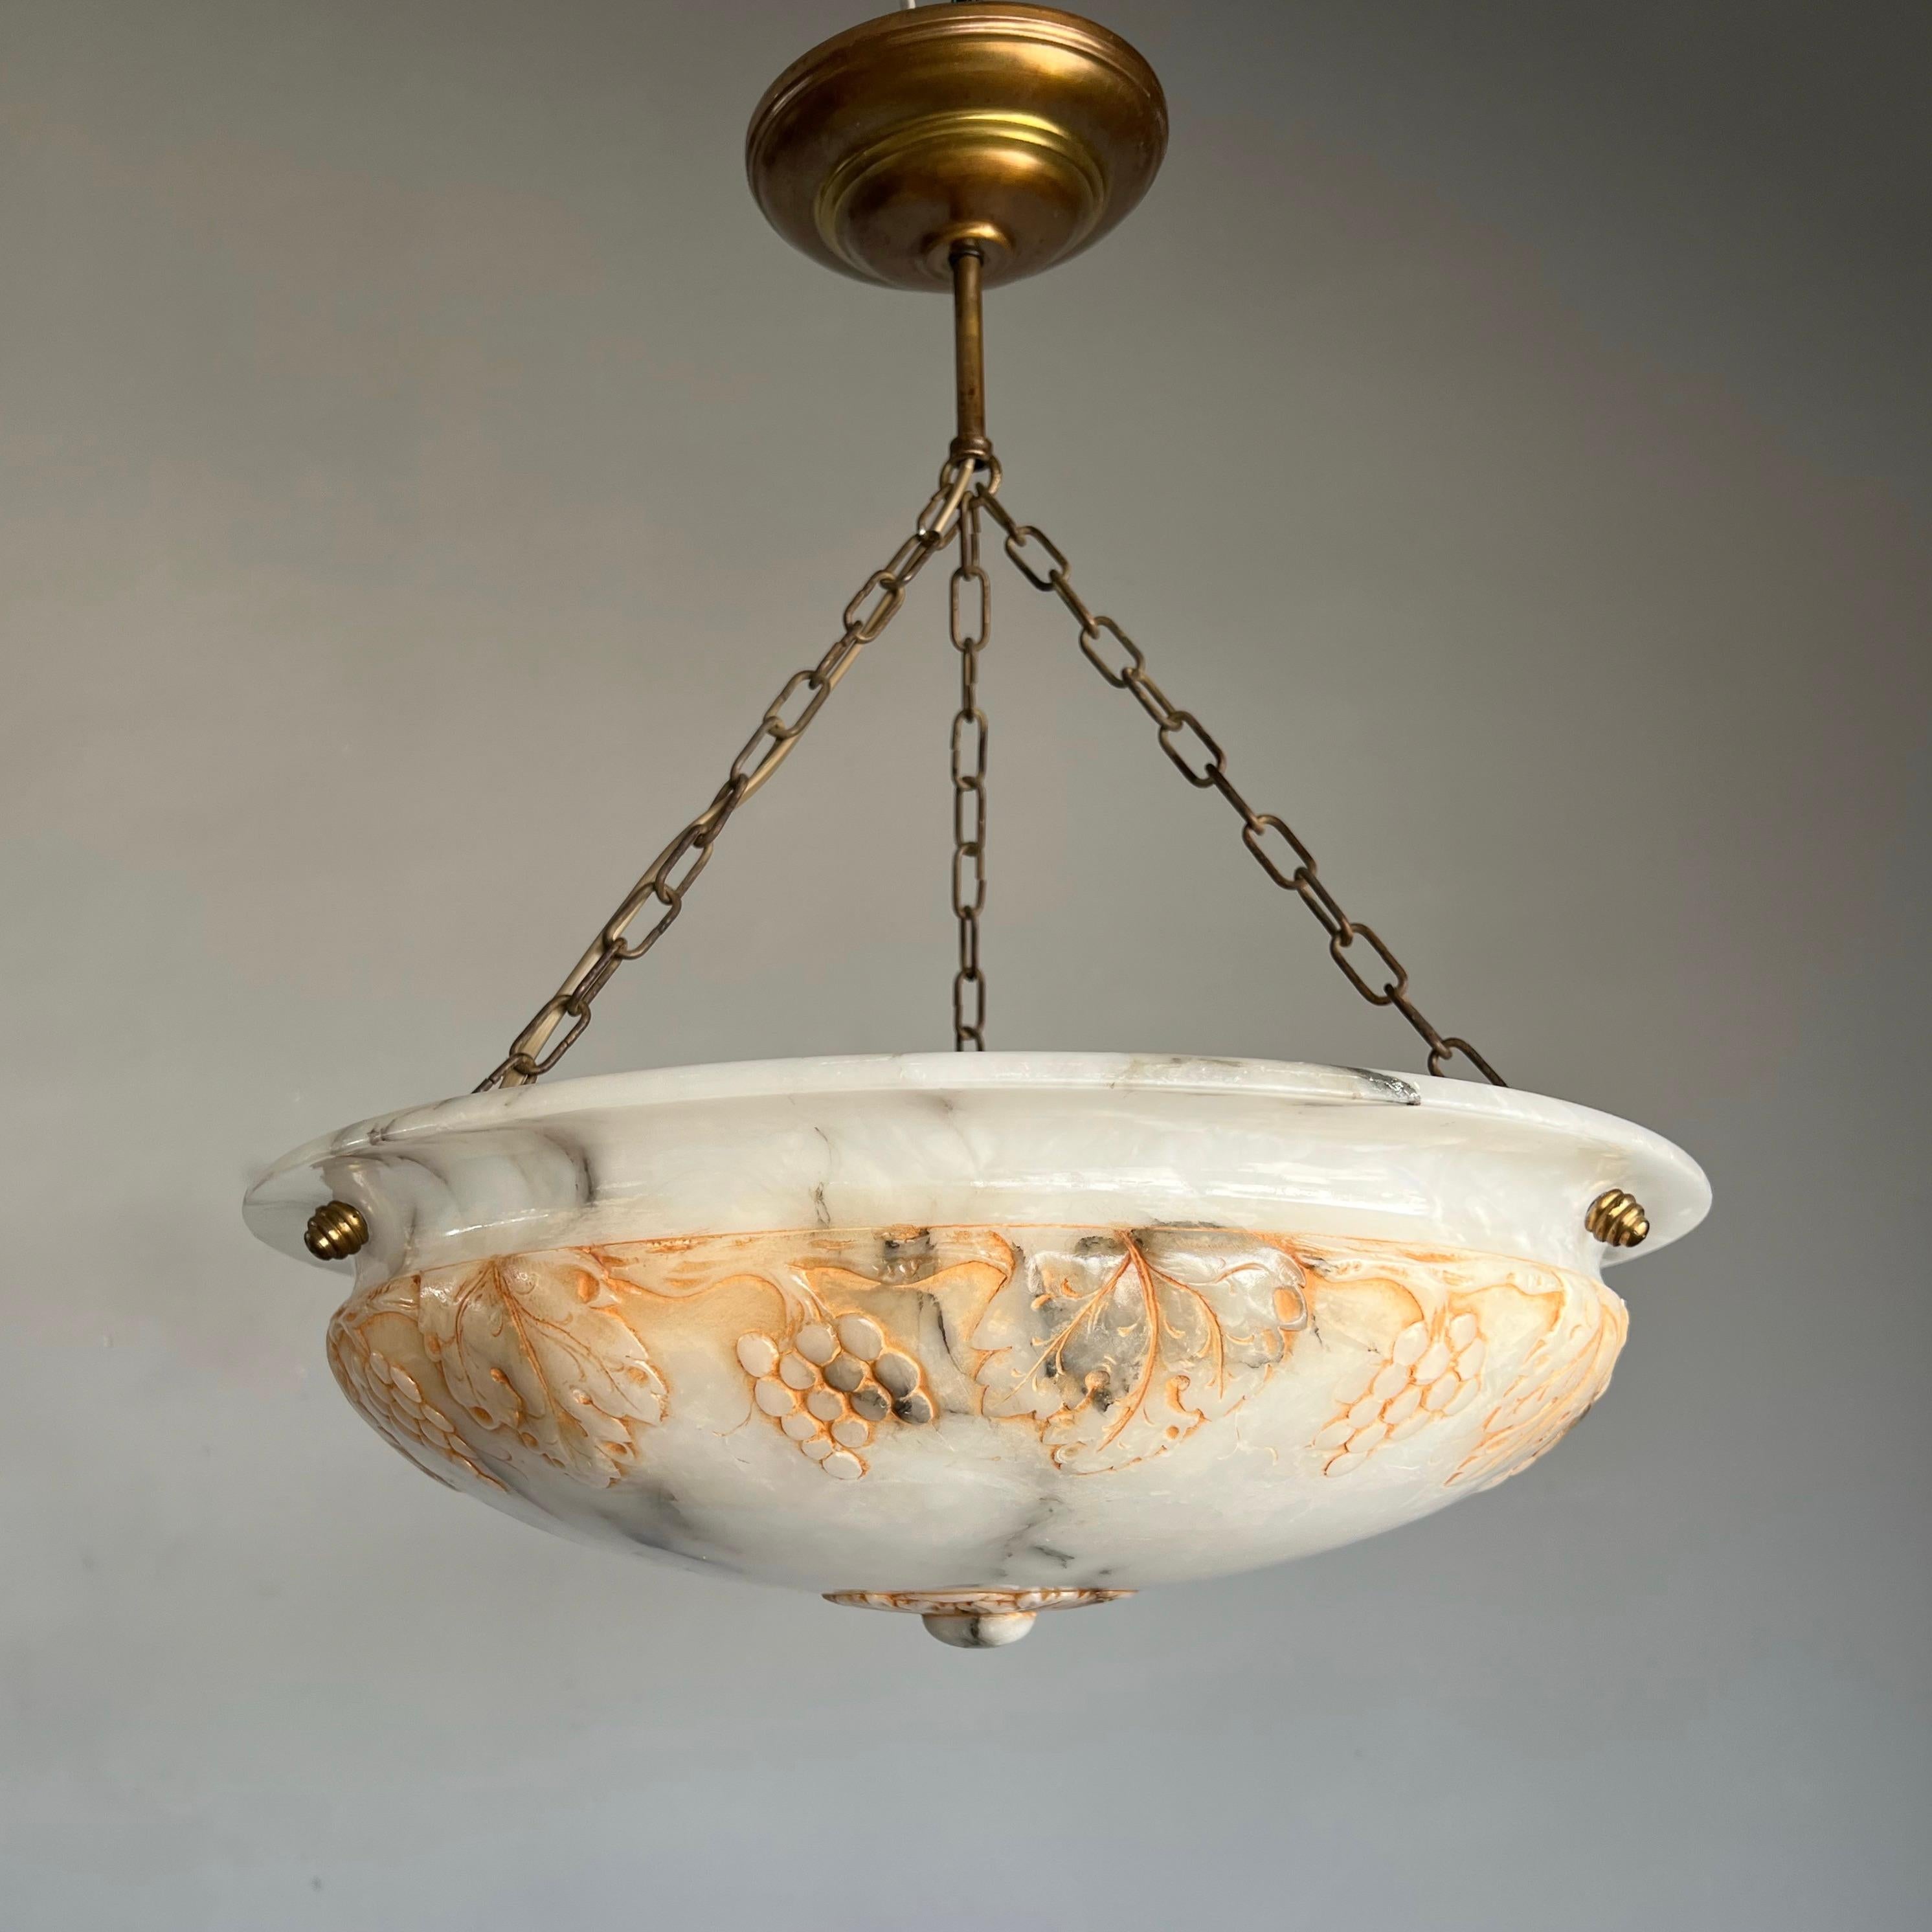 Top Class, Arts & Crafts era Chandelier with an Unique Carved Alabaster Shade  For Sale 10